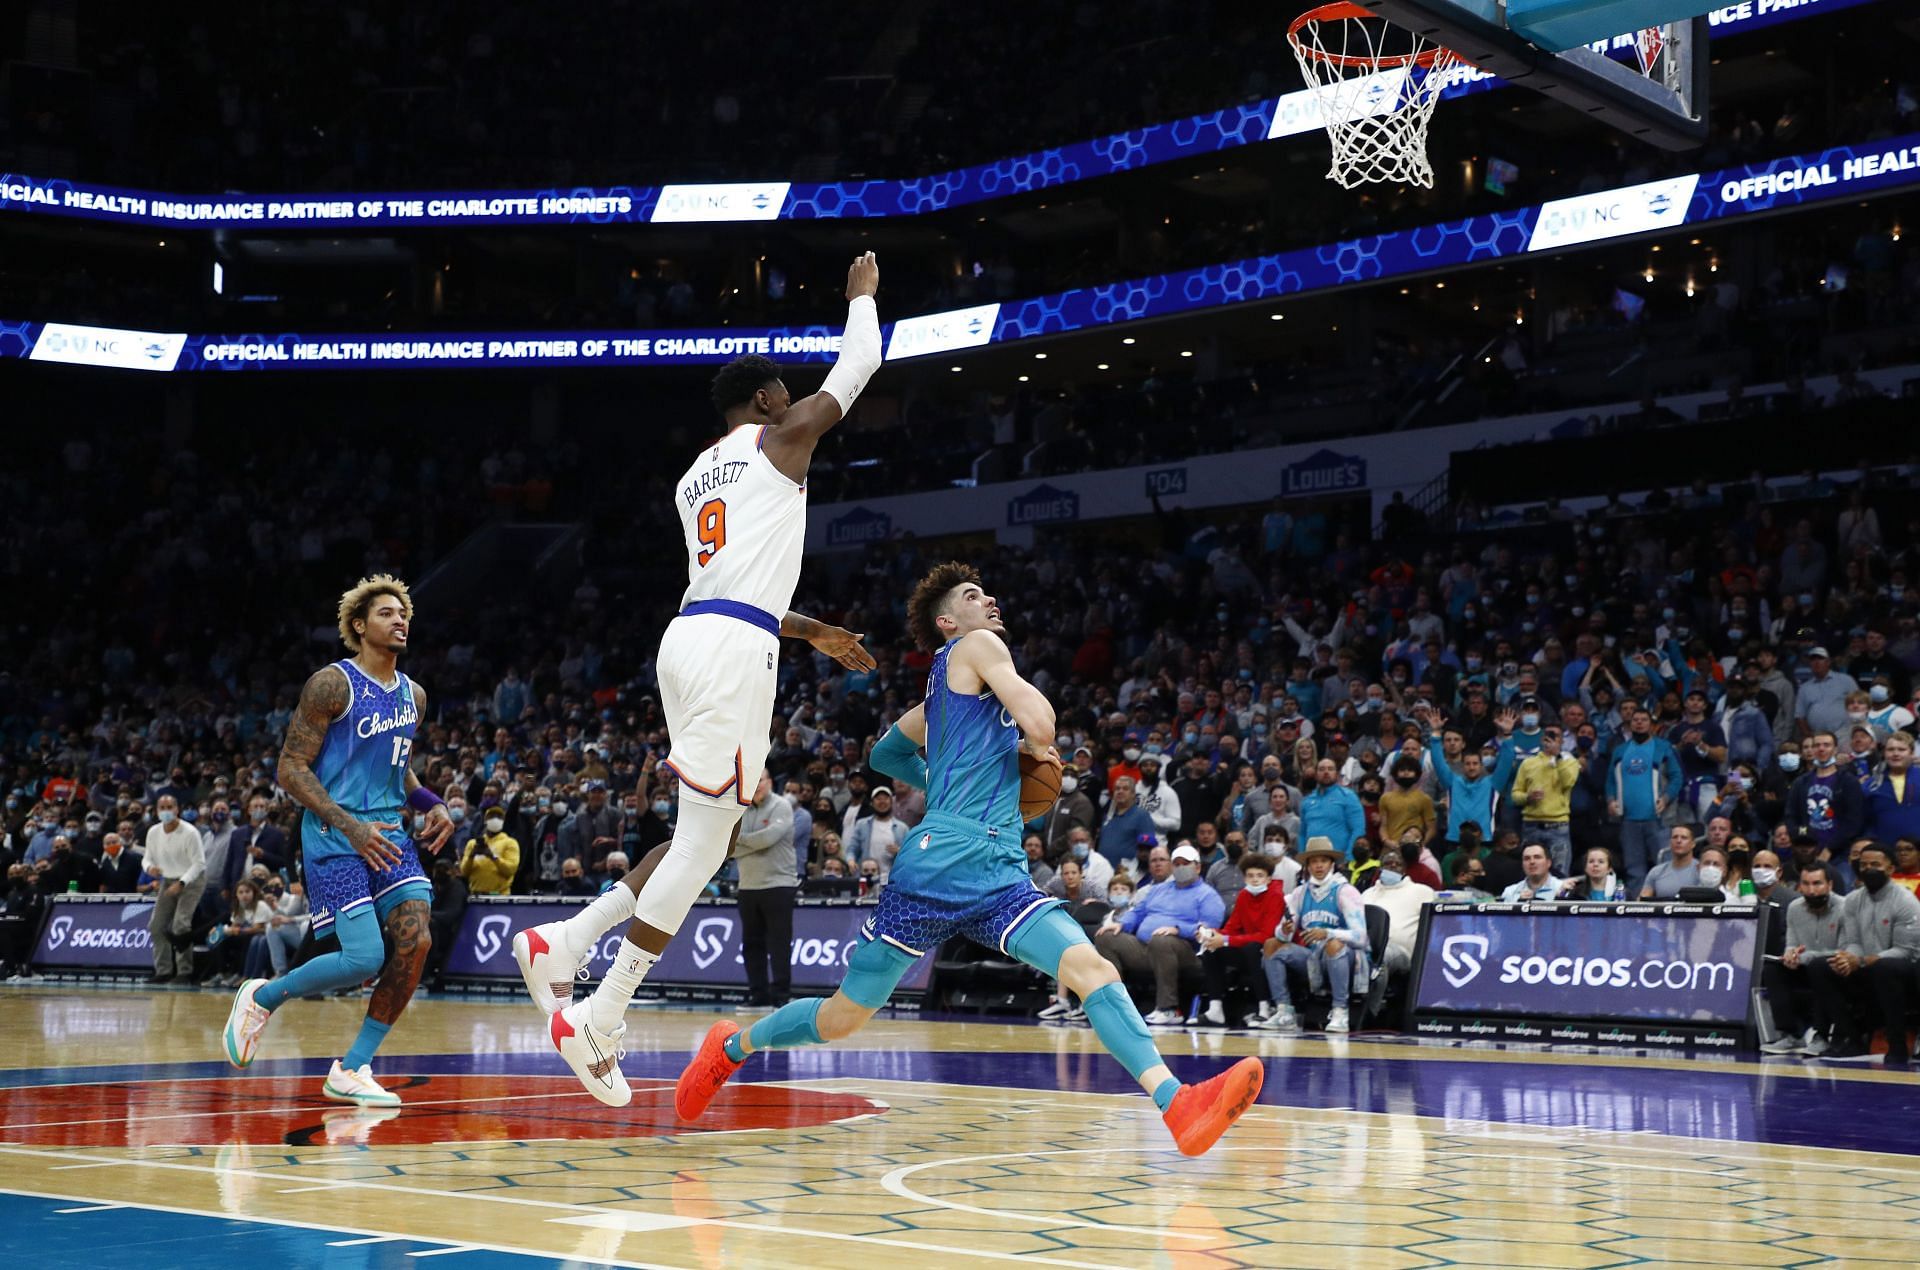 The New York Knicks will host the Charlotte Hornets on January 17th.